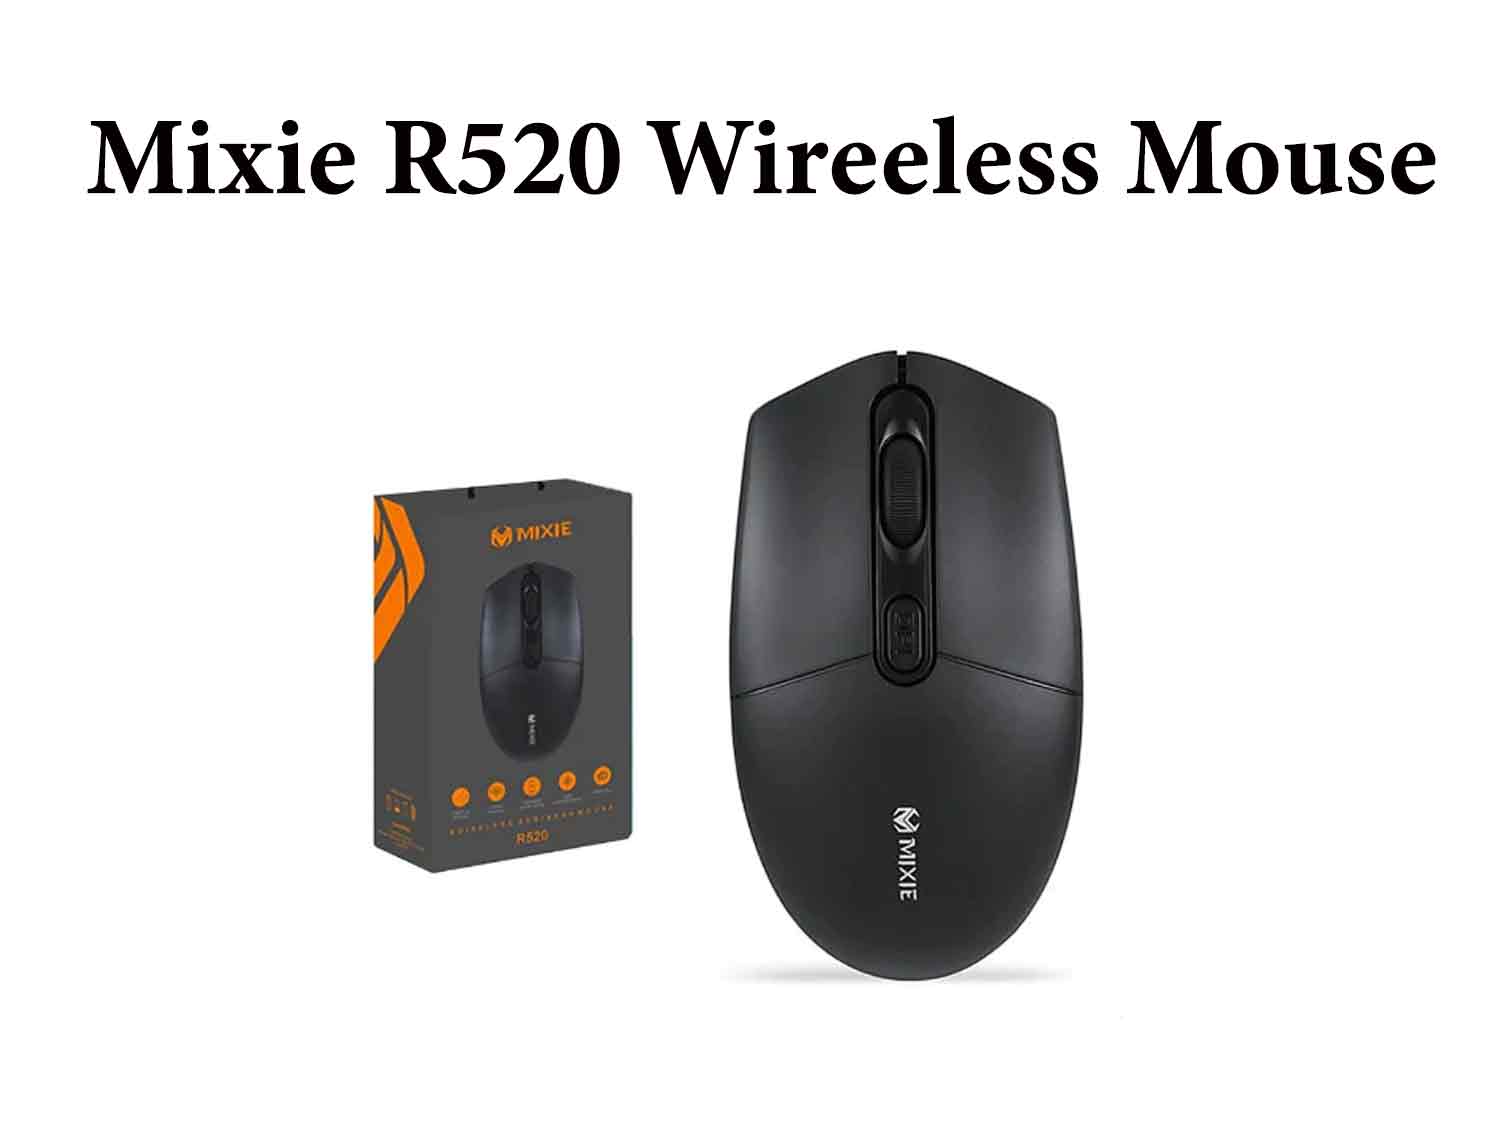 Mixie R520 Wireeless Mouse